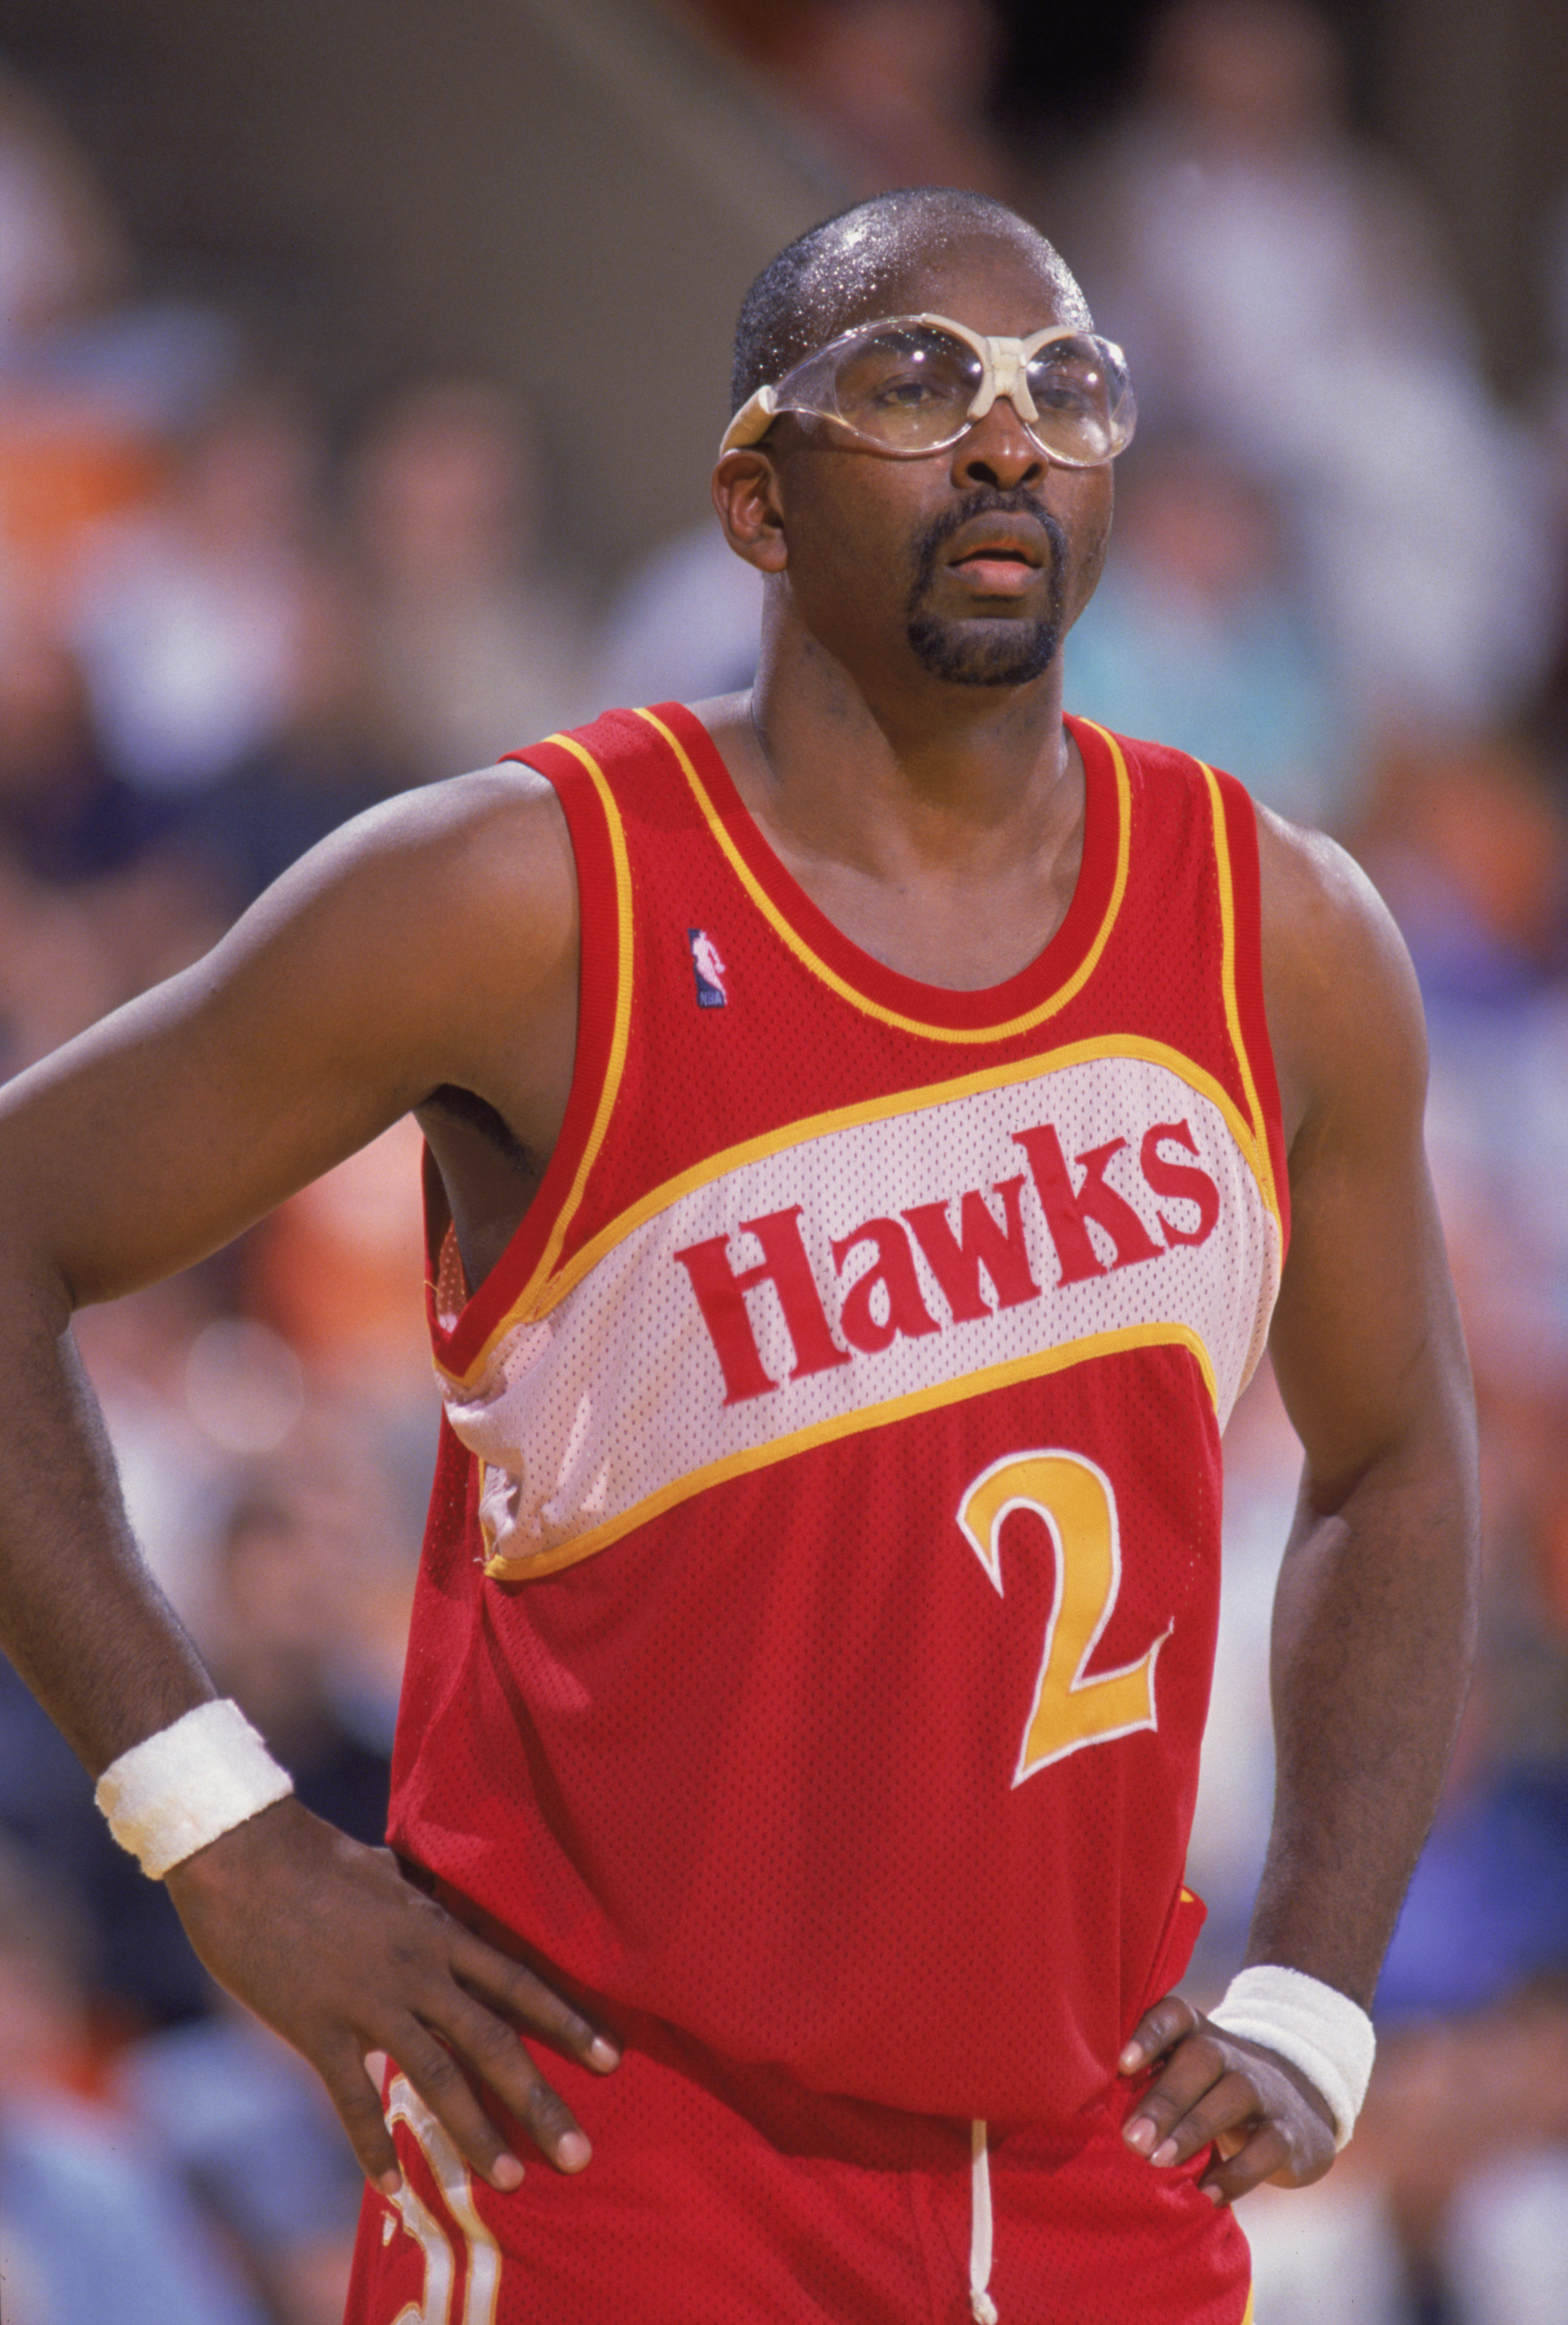 INGLEWOOD, CA - 1988:  Moses Malone #2 of the Atlanta Hawks stands on the court during a NBA game against the Los Angeles Lakers at the Great Western Forum in Inglewood, California in 1988.  (Photo by Mike Powell/Getty Images)